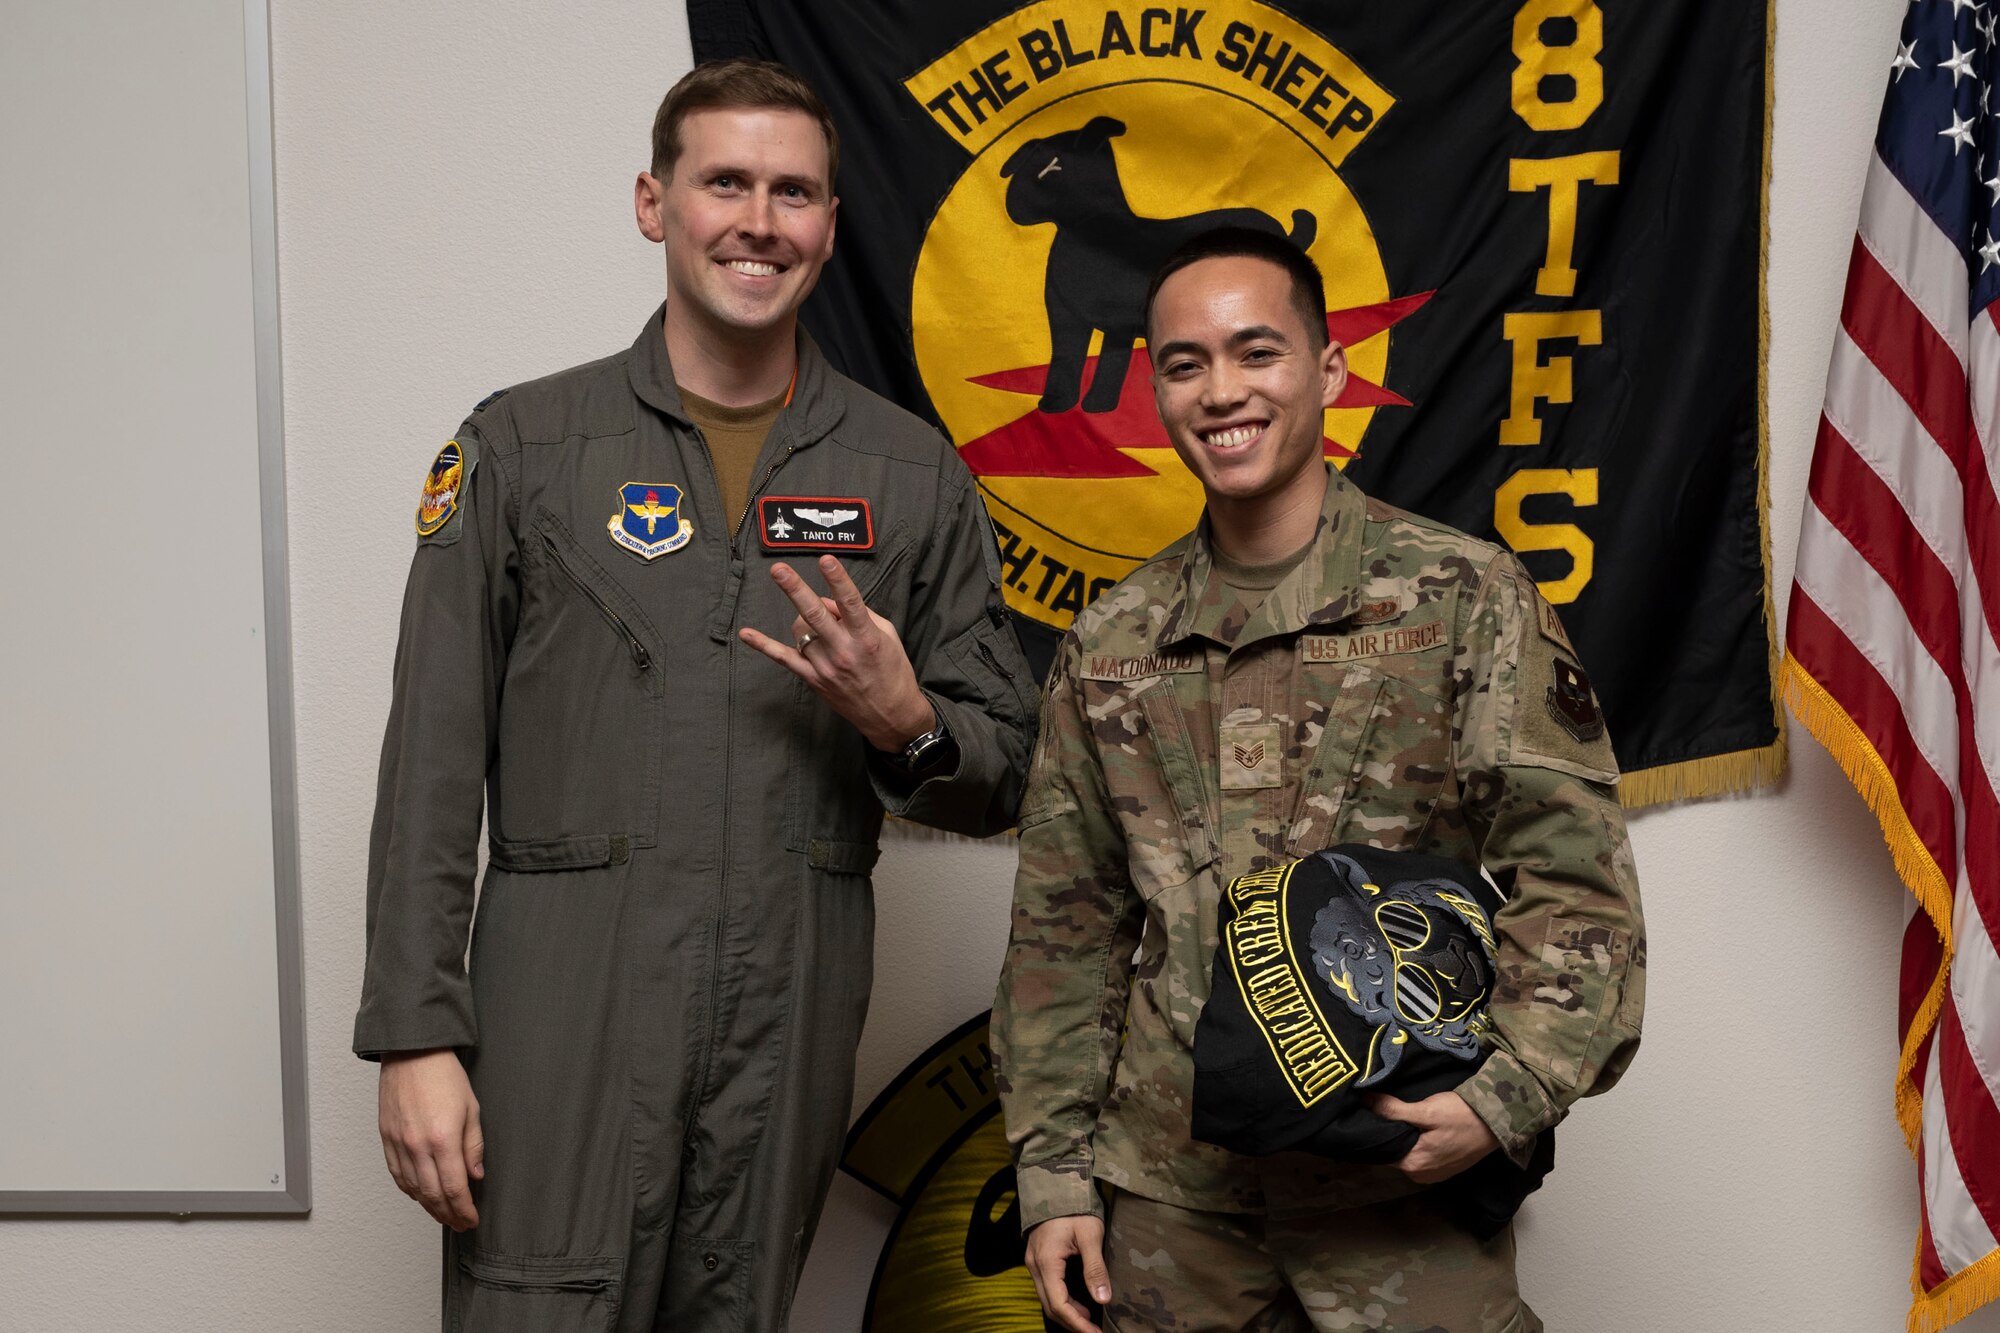 U.S. Air Force Staff Sgt. Brandon Maldonado, 8th Aircraft Maintenance Unit crew chief, right, poses for a photo with U.S. Air Force Capt. Thomas Fry, 8th Fighter Squadron pilot, during a Dedicated Crew Chief Appointment ceremony at Holloman Air Force Base, New Mexico, Jan. 3, 2022. To receive the title of DCC, a crew chief must demonstrate a history of superior performance in their career, comply with all safety practices and complete all required training. (U.S. Air Force photo by Senior Airman Antonio Salfran)